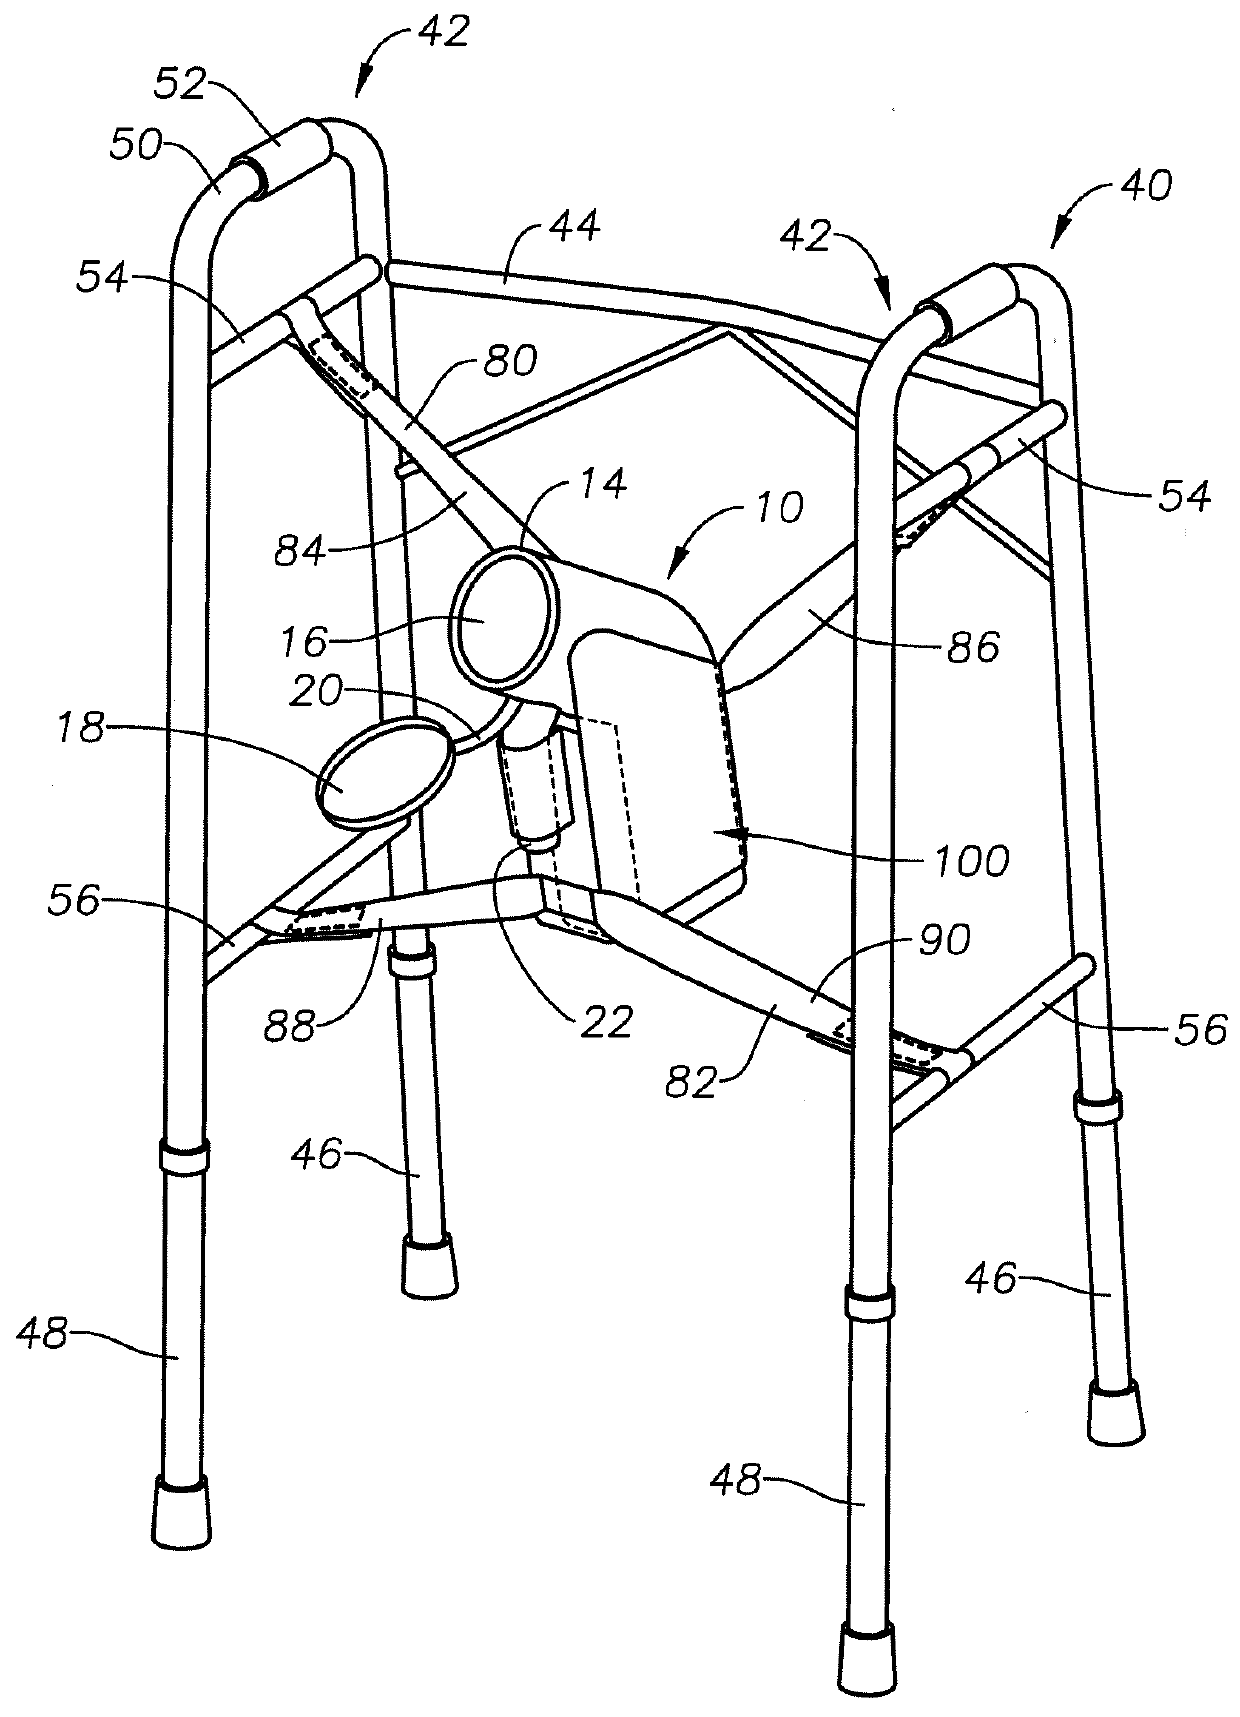 Portable urinal mounting assembly